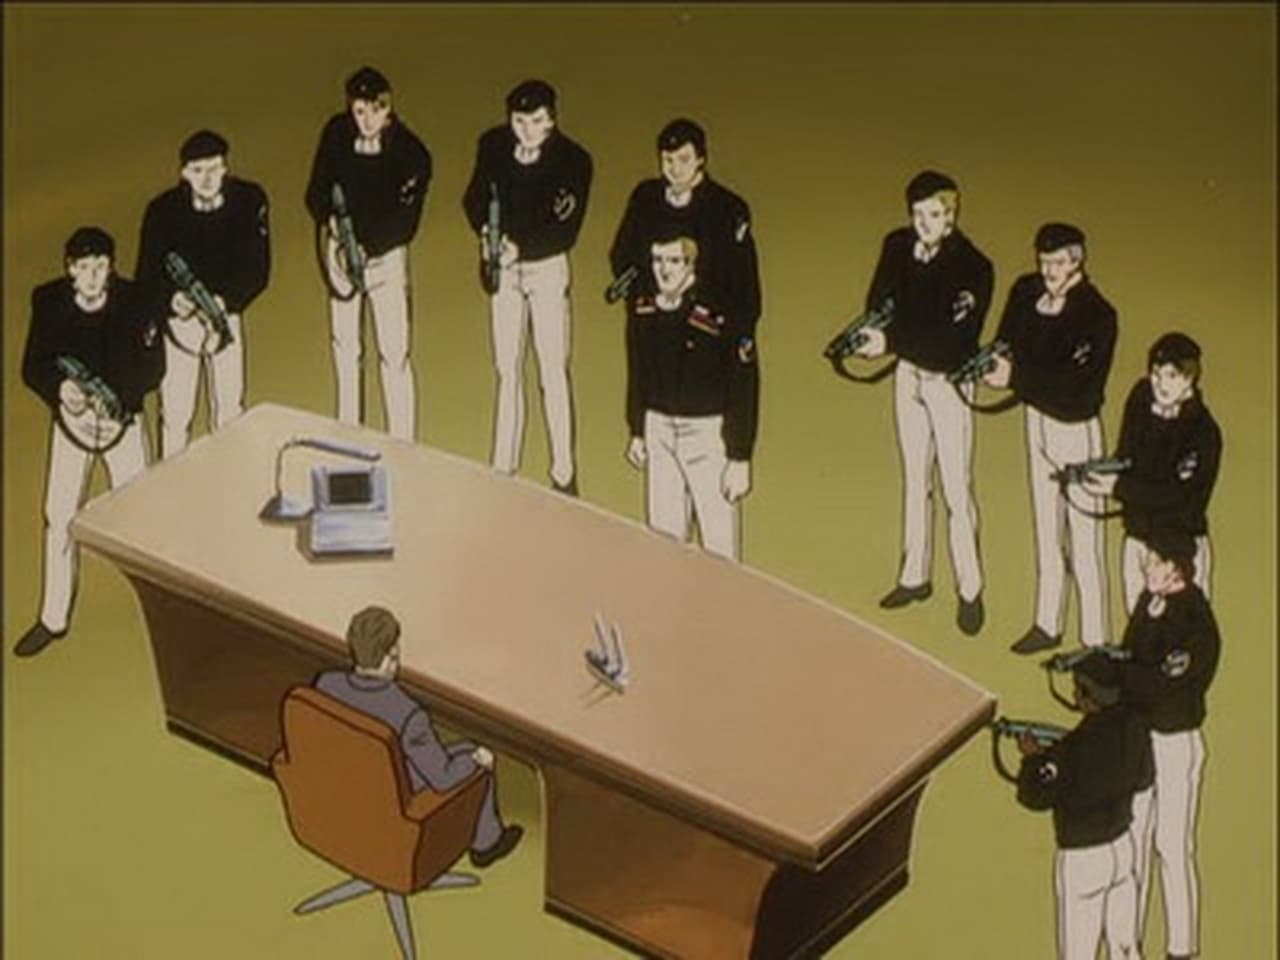 Legend of the Galactic Heroes - Season 3 Episode 19 : Imperial Edict of the Winter Rose Garden